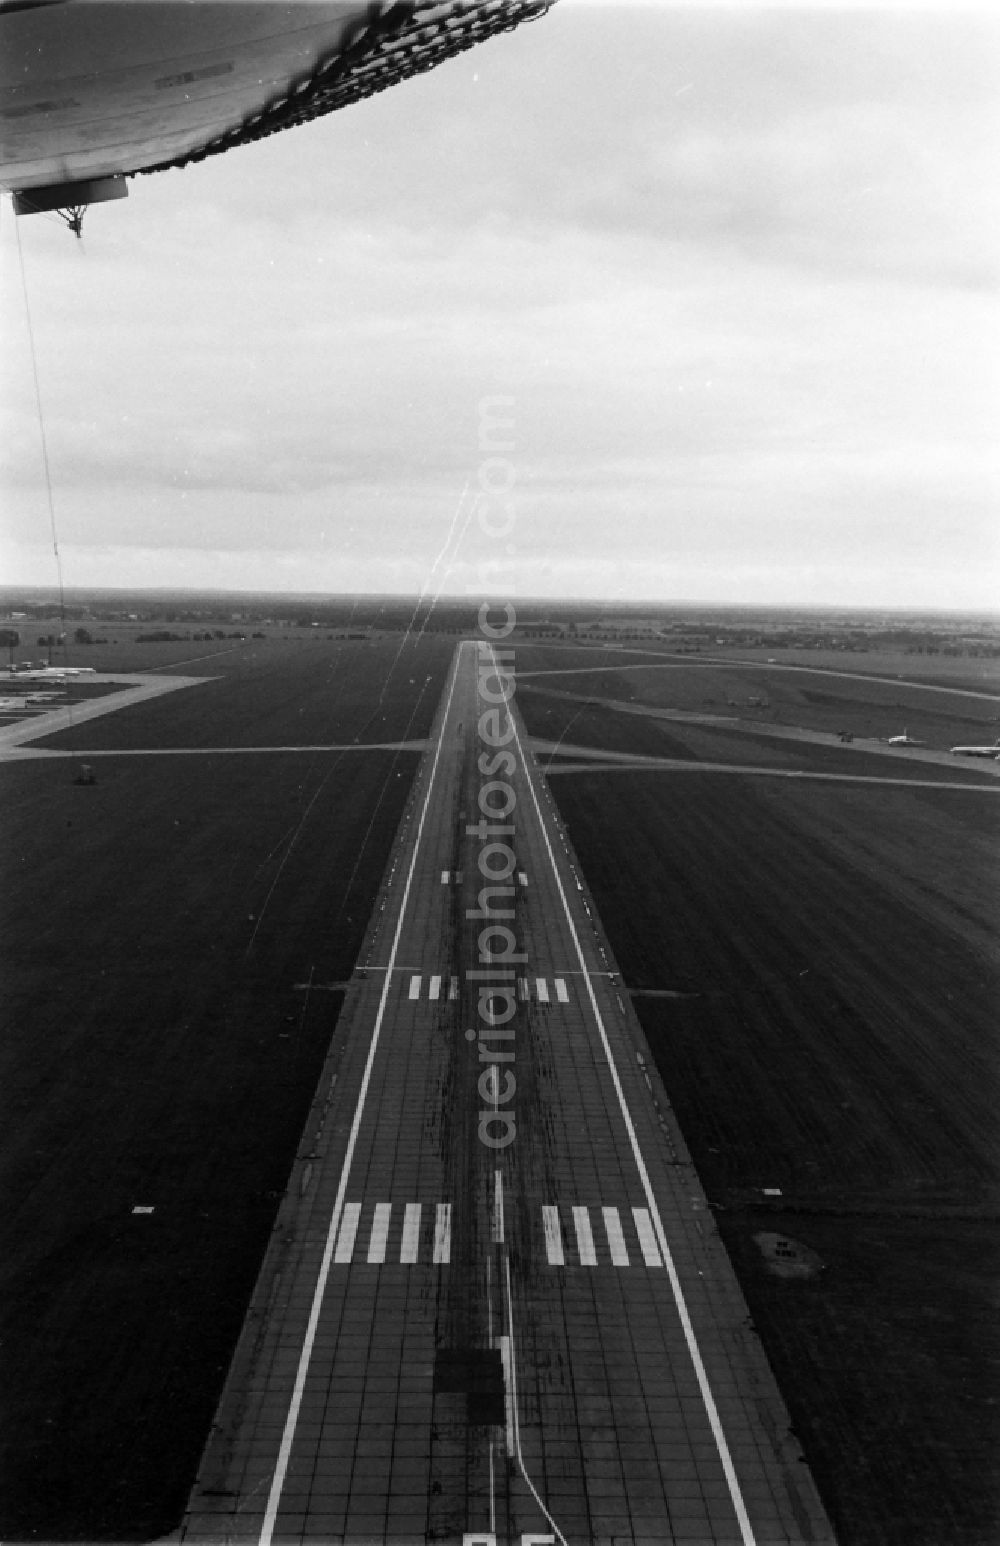 Schönefeld from the bird's eye view: Runway with hangar taxiways and terminals on the grounds of the airport in Schoenefeld in the state Brandenburg, Germany